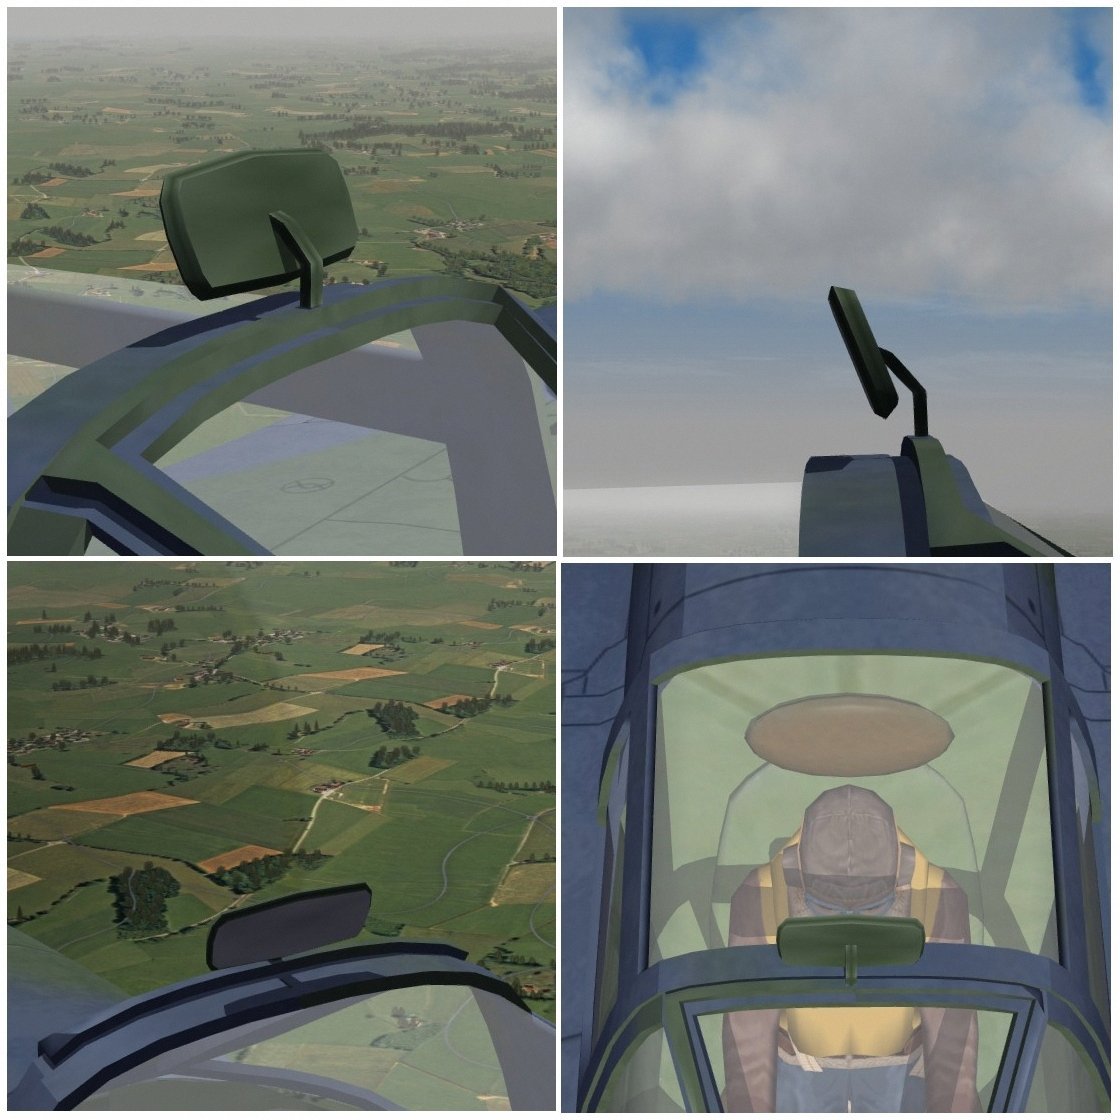 RAF-style mirror object addon to match Stary's early WWII cockpit